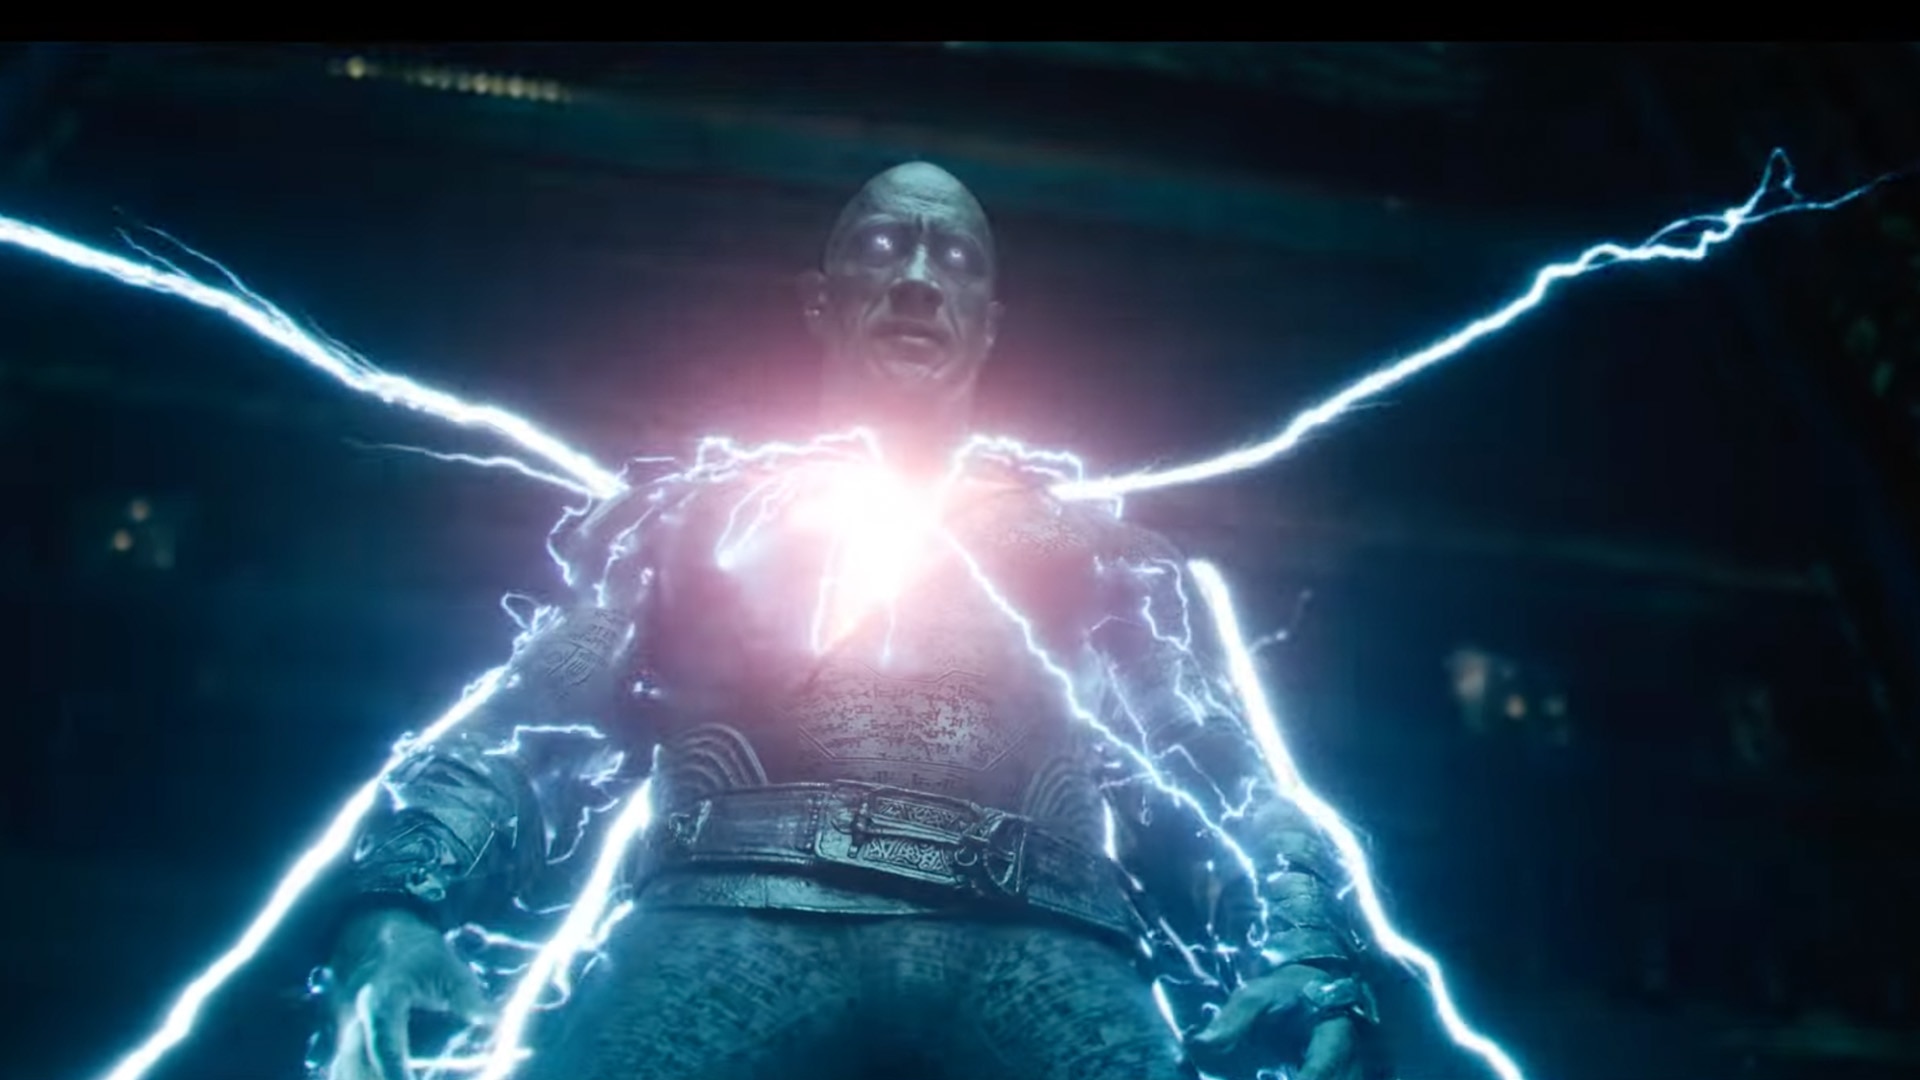 Black Adam 2 release date speculation, cast, story, and more news